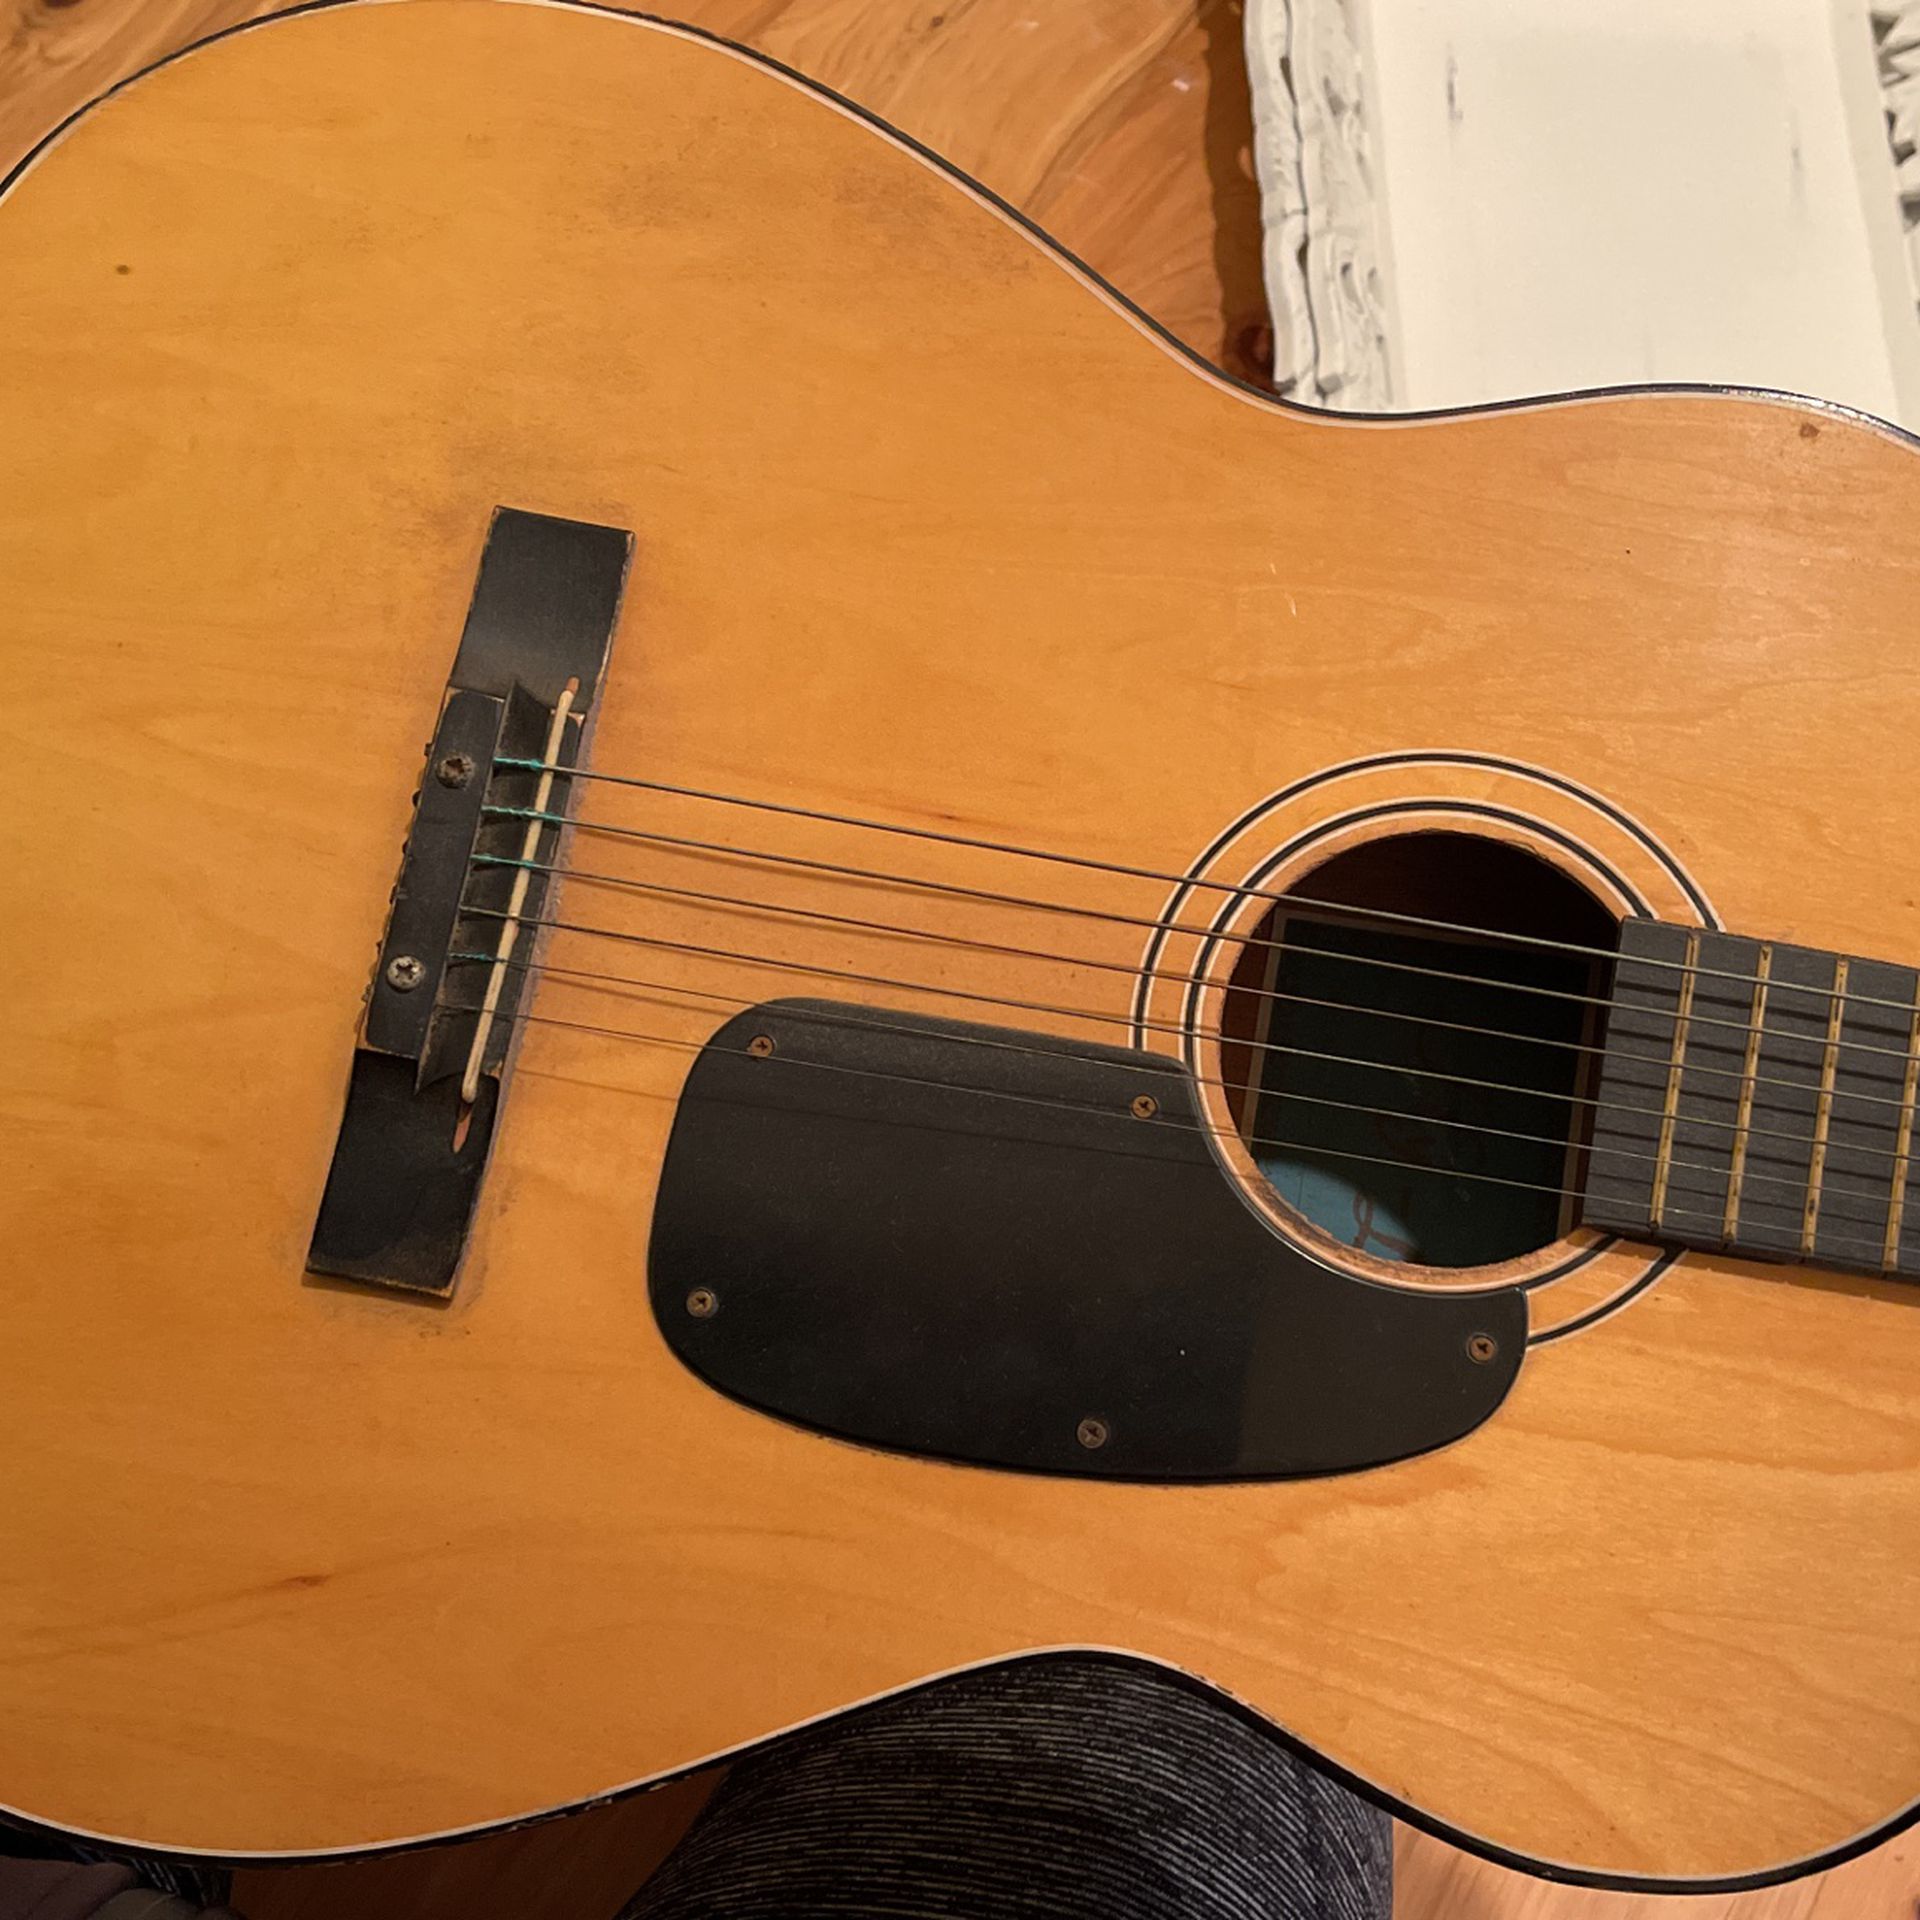 HyLo 424 Acoustic Guitar (made in Japan)